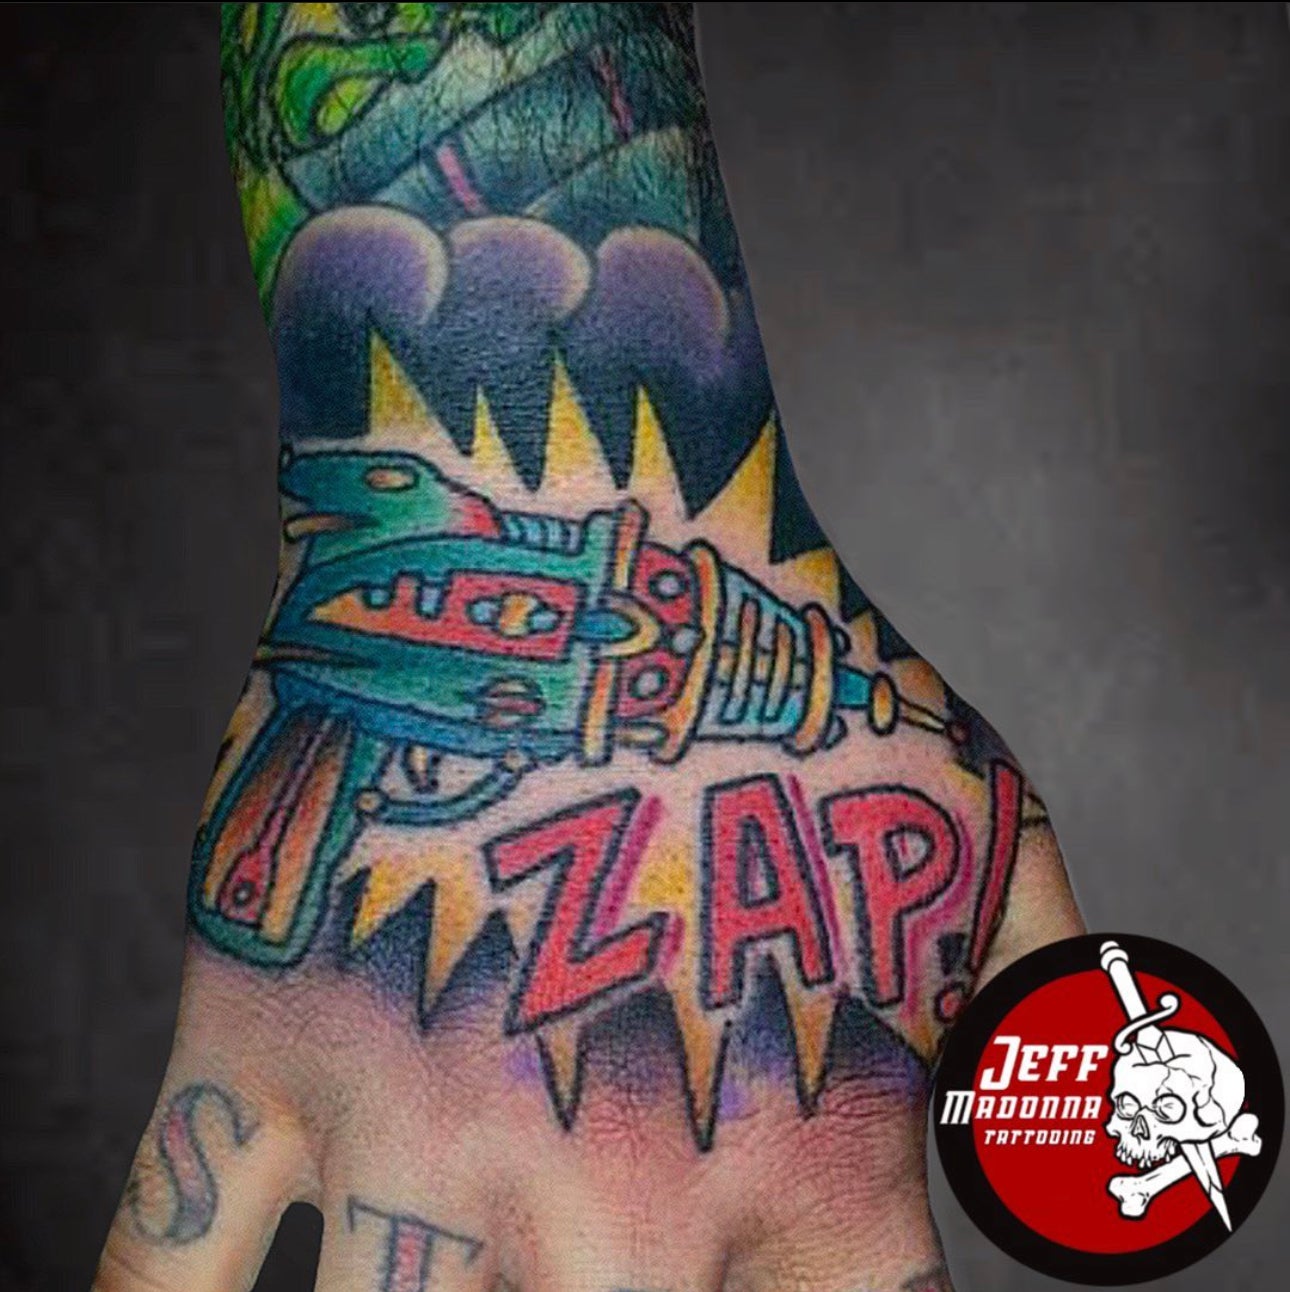 All these Tattoos are by Jeff Ziozios  Instagram